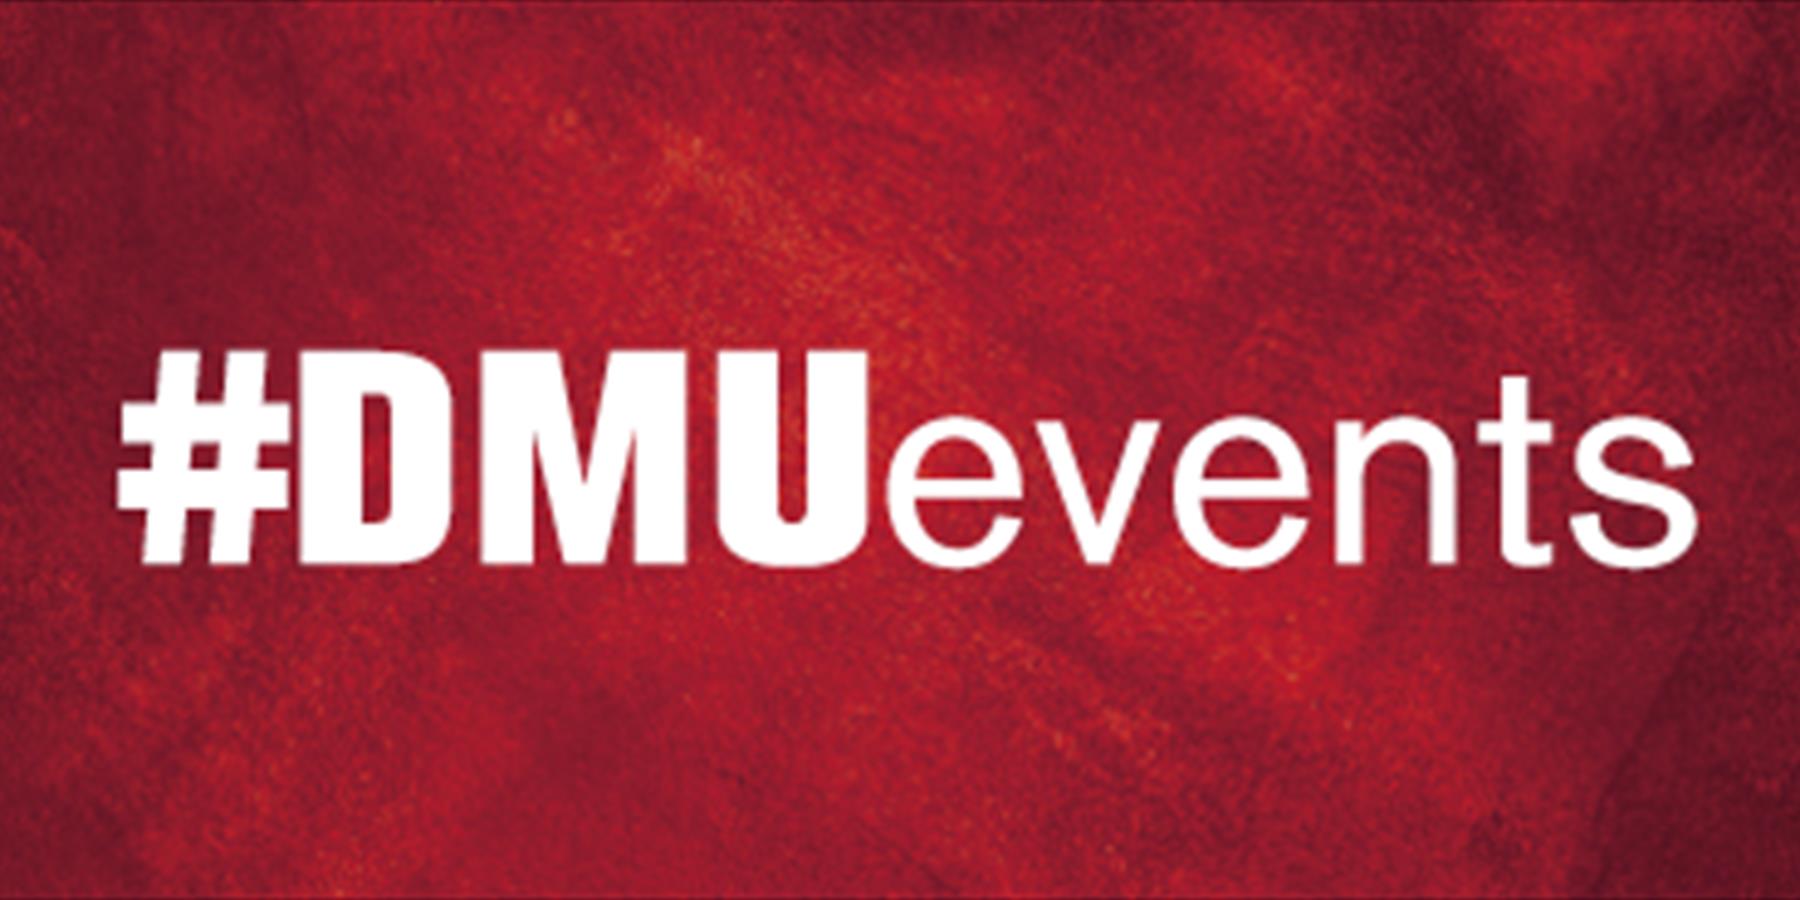 DMU Events banner